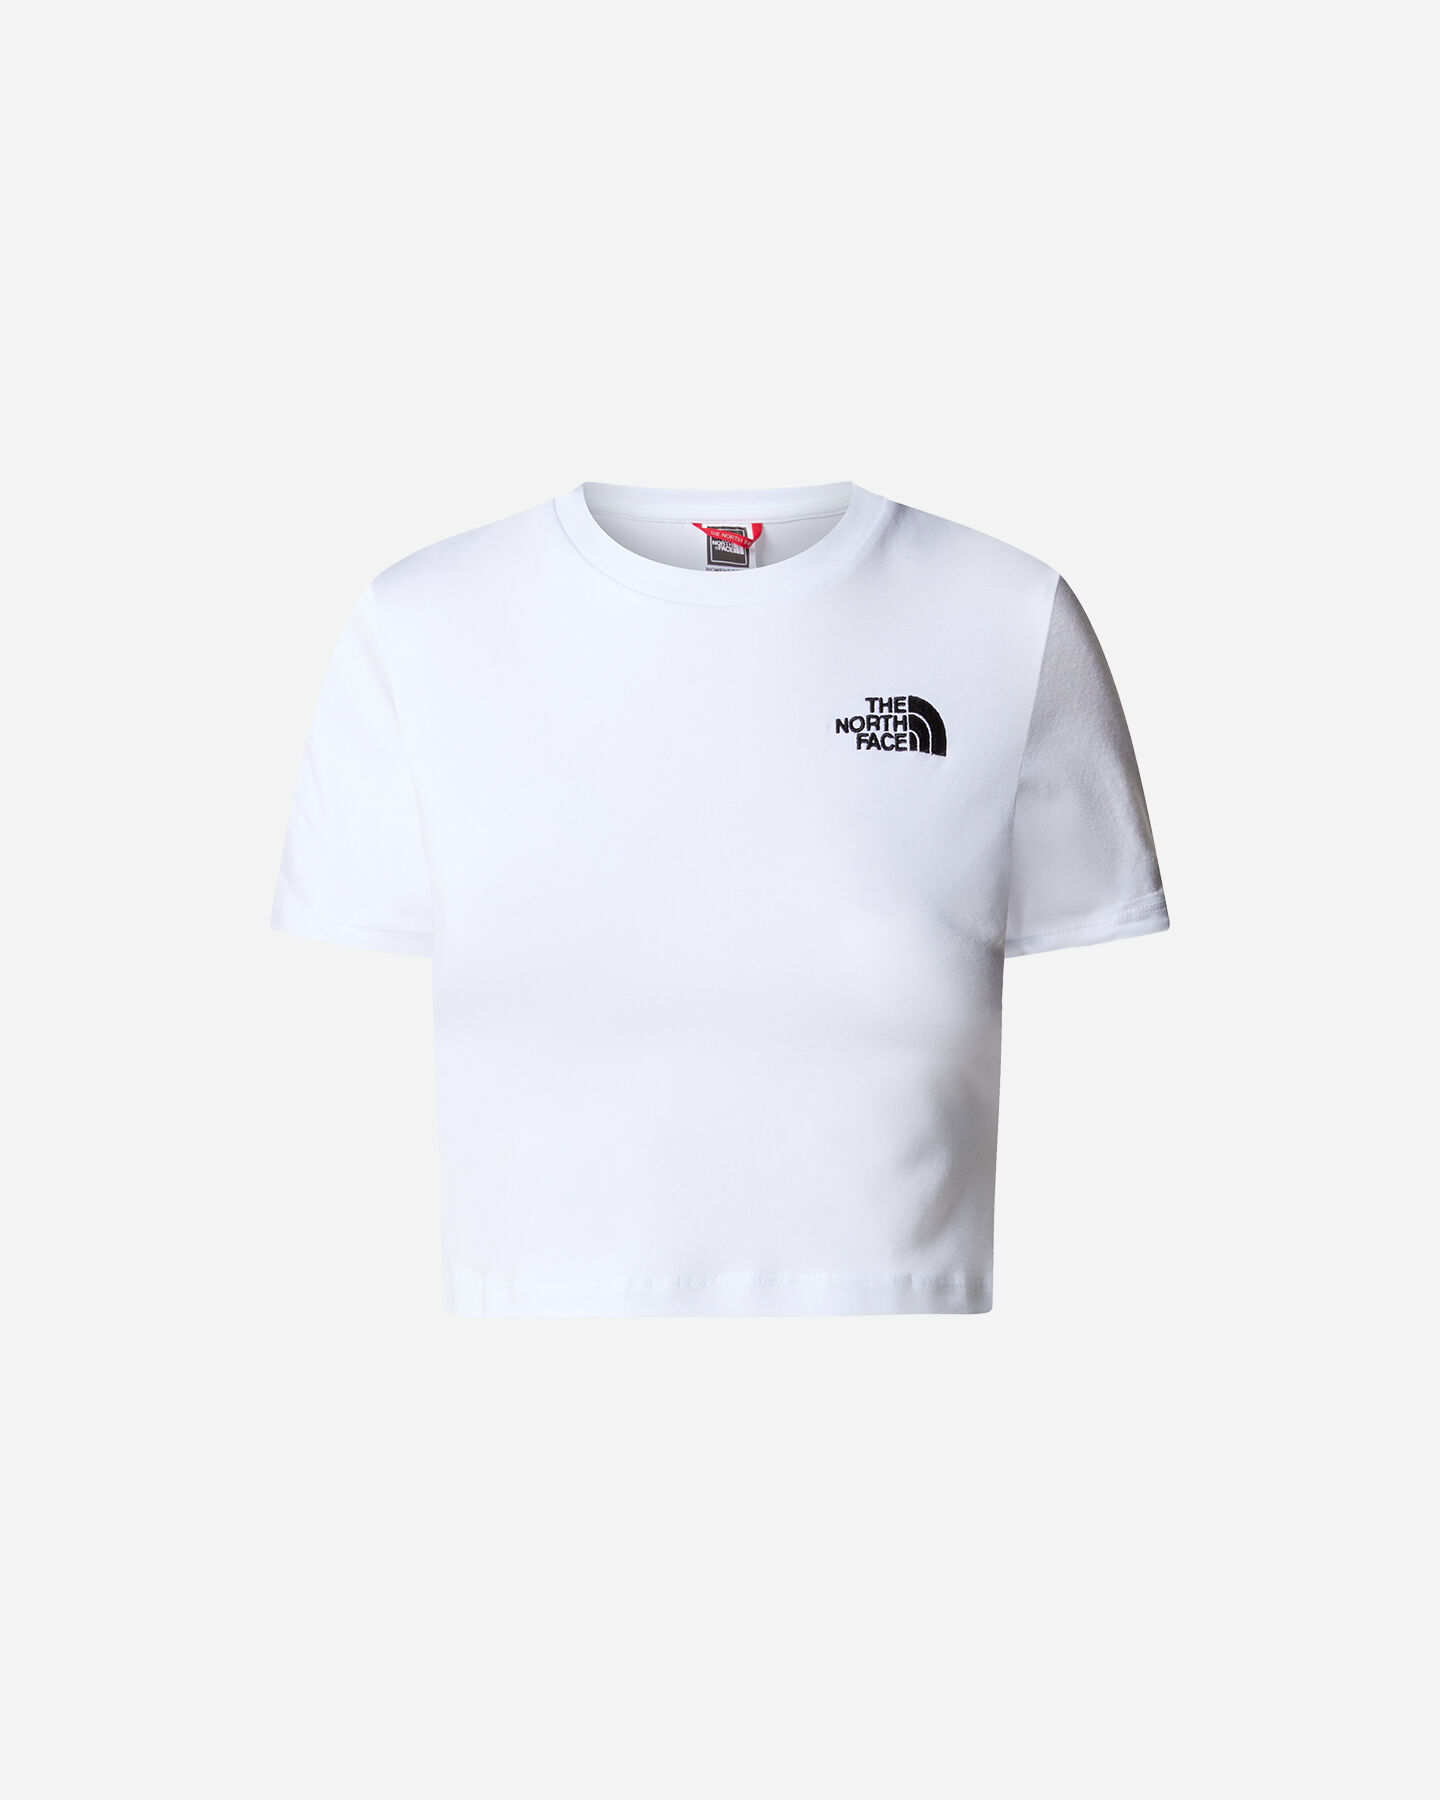  T-Shirt THE NORTH FACE SMALL LOGO W S5474647|FN4|XS scatto 0